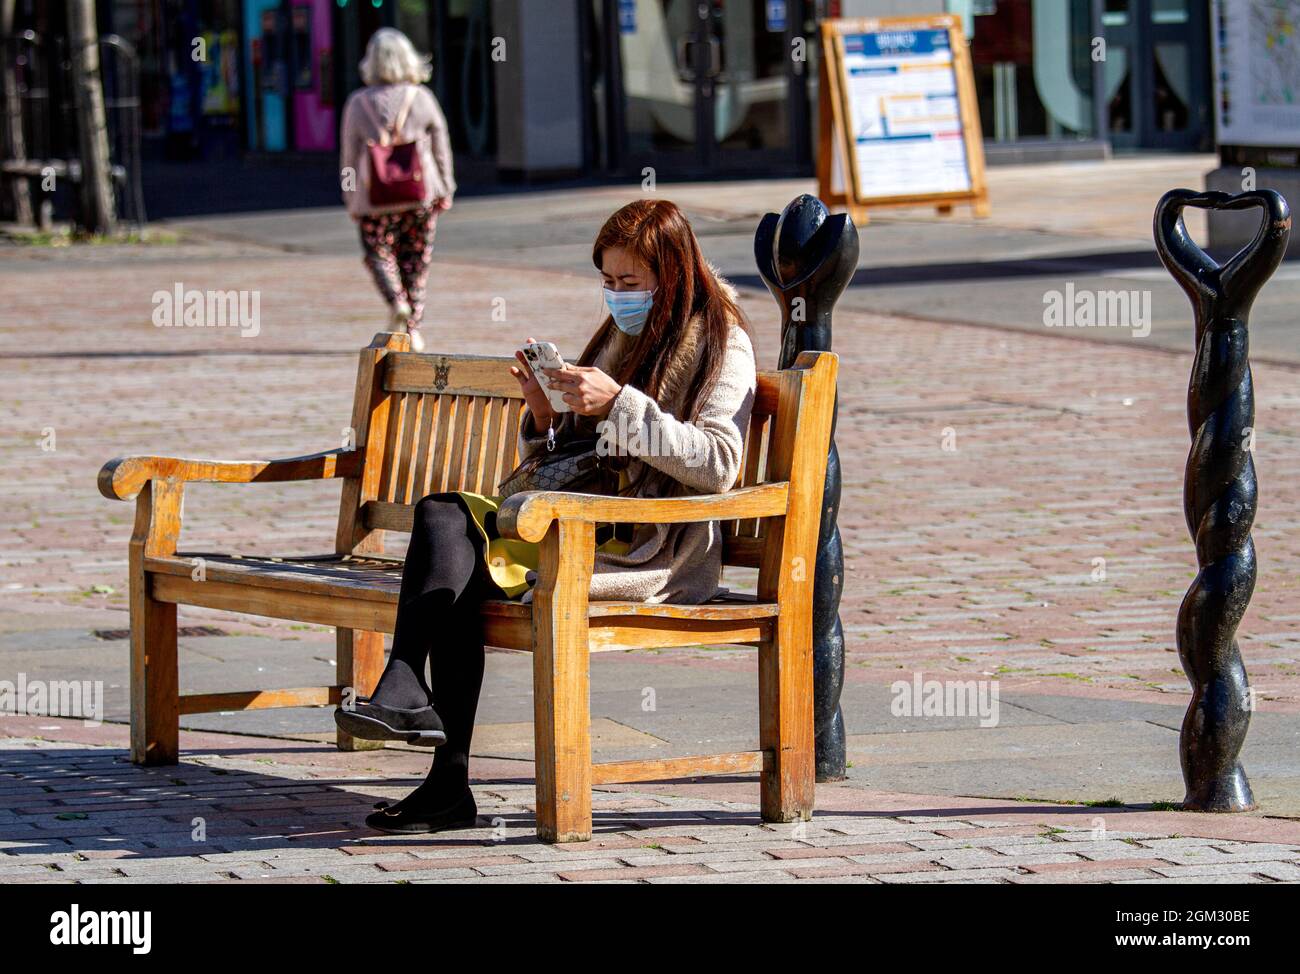 Dundee, Tayside, Scotland, UK. 16th Sep, 2021. UK weather: Warm mid September sunshine across North East Scotland with temperatures reaching 19°C. A South East Asian woman wearing a facemask spending the day out enjoying the glorious warm sunny weather whilst texting messages on her mobile phone in Dundee city centre. Credit: Dundee Photographics/Alamy Live News Stock Photo